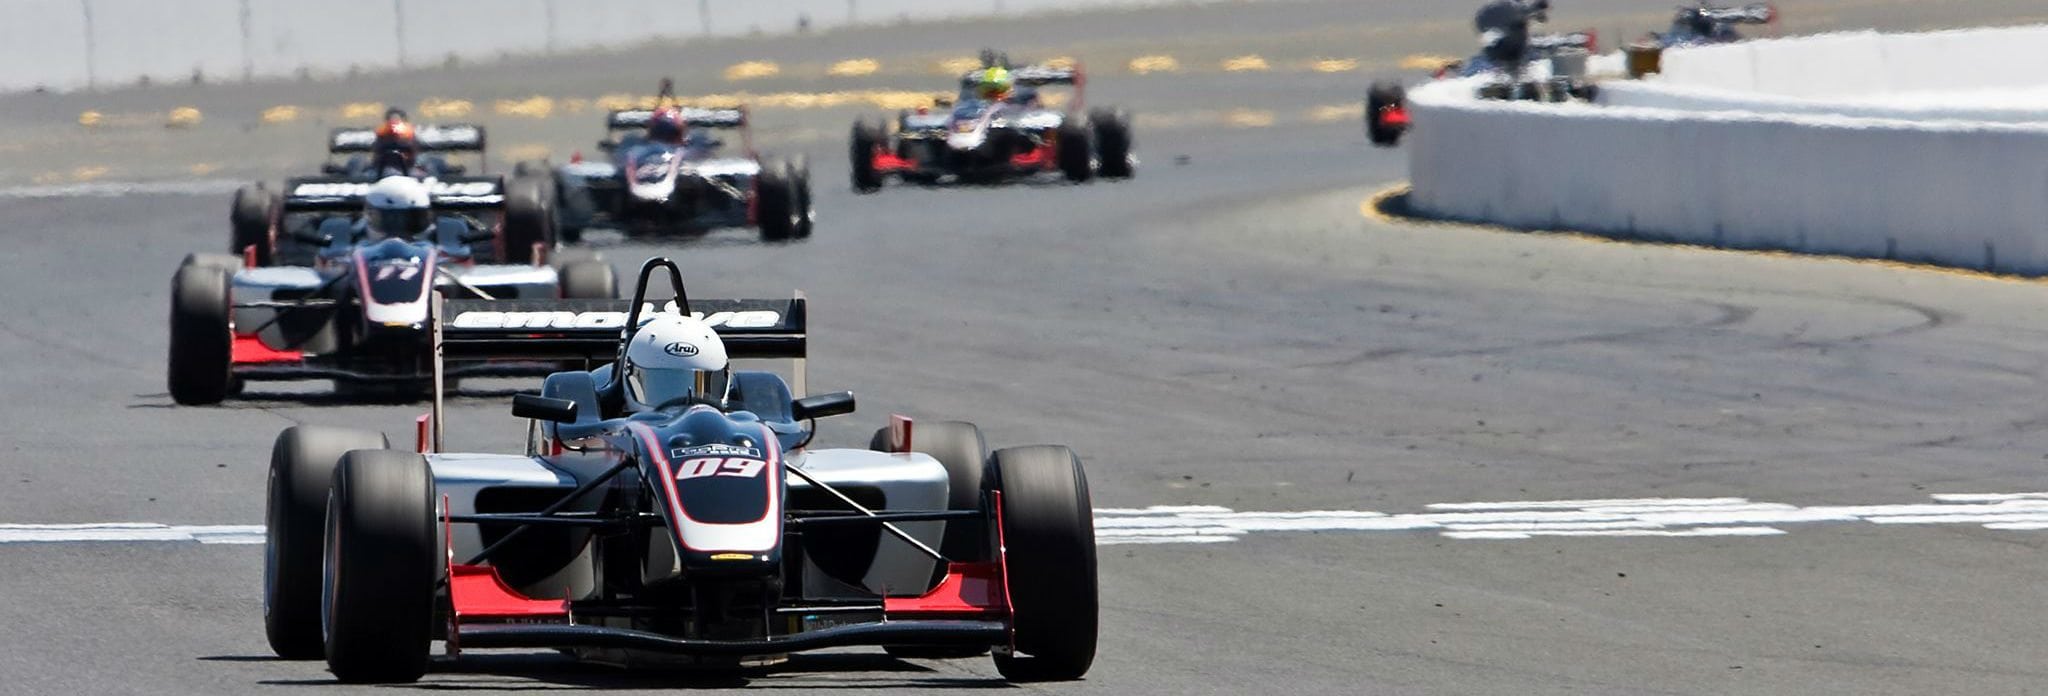 Formula 3 Racing Series Races From 1 295